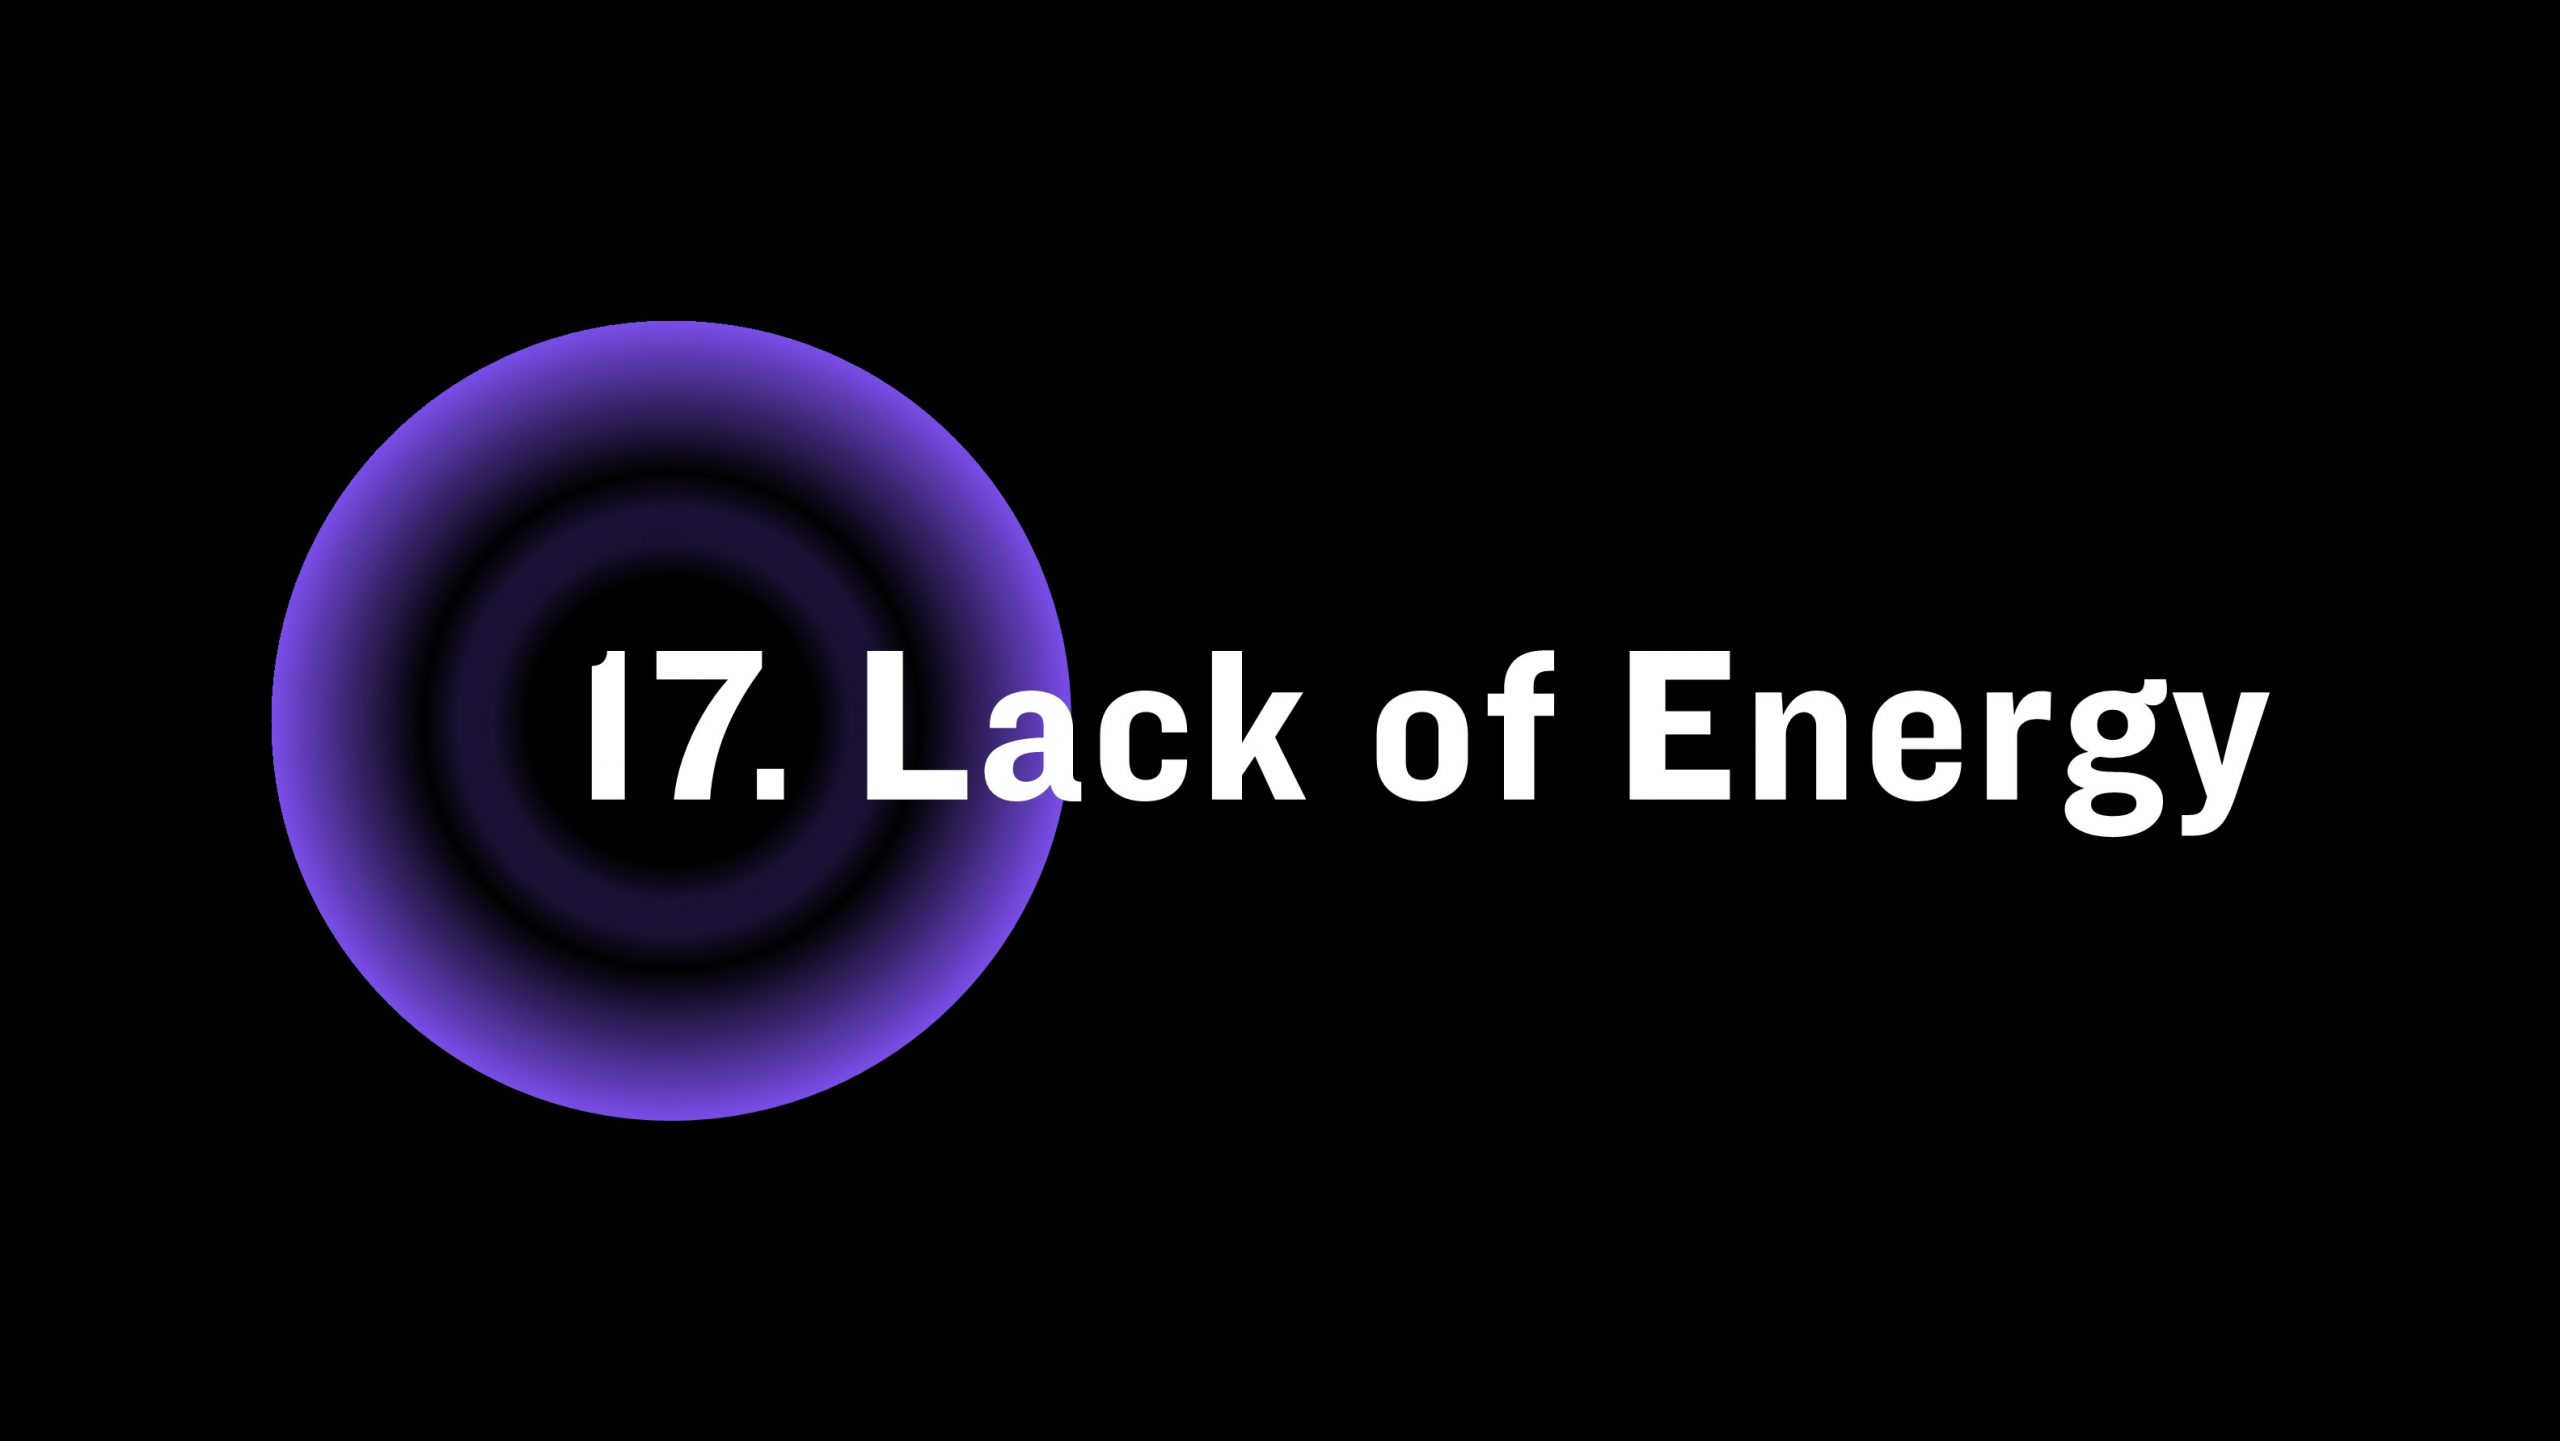 Lack of energy